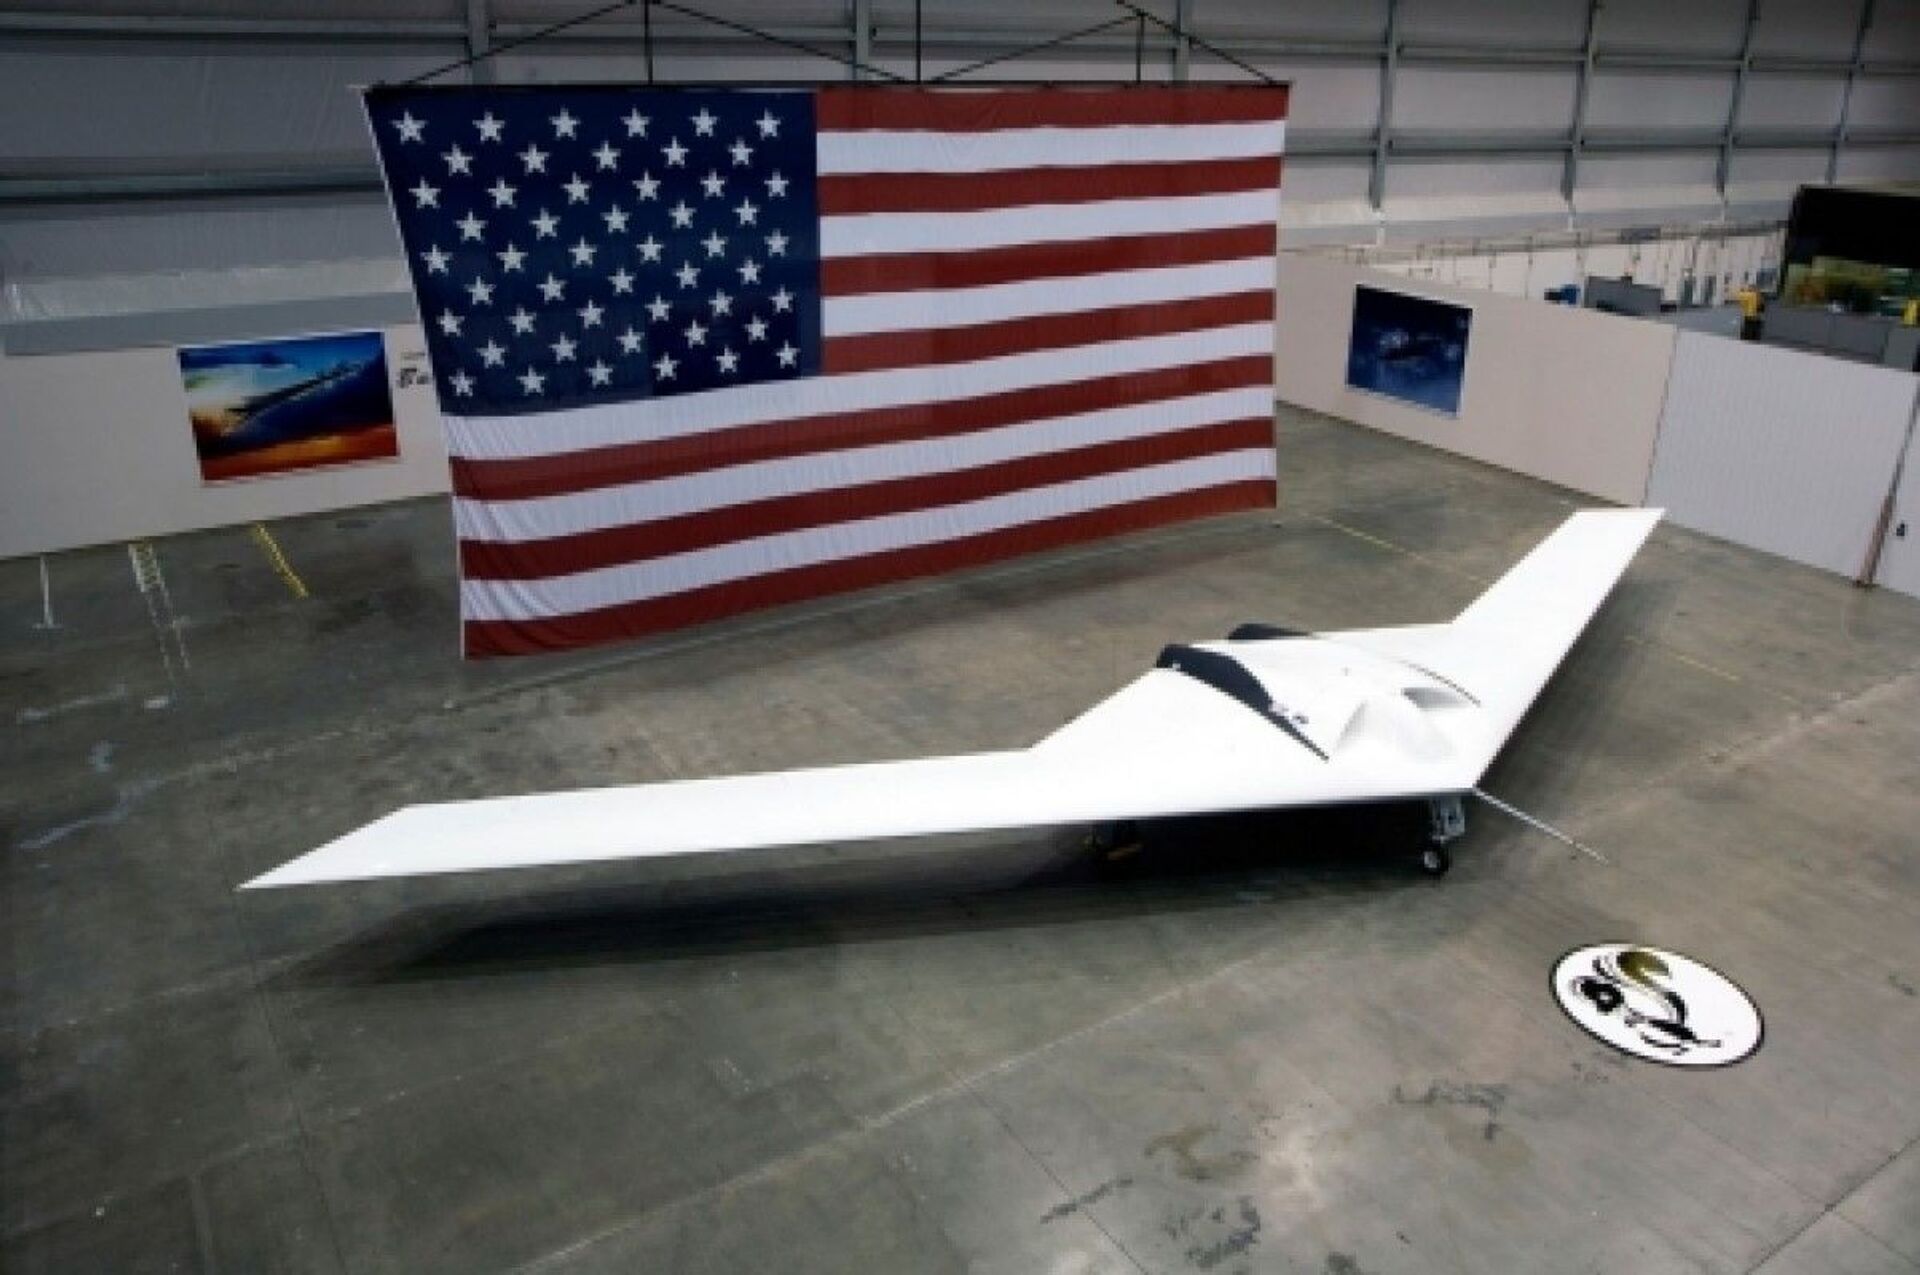 An image of the P-175 Polecat, a high-altitude unmanned aircraft demonstrator built by Lockheed Martin's Skunk Works. Its one flying model crashed in 2006. - Sputnik International, 1920, 01.11.2021